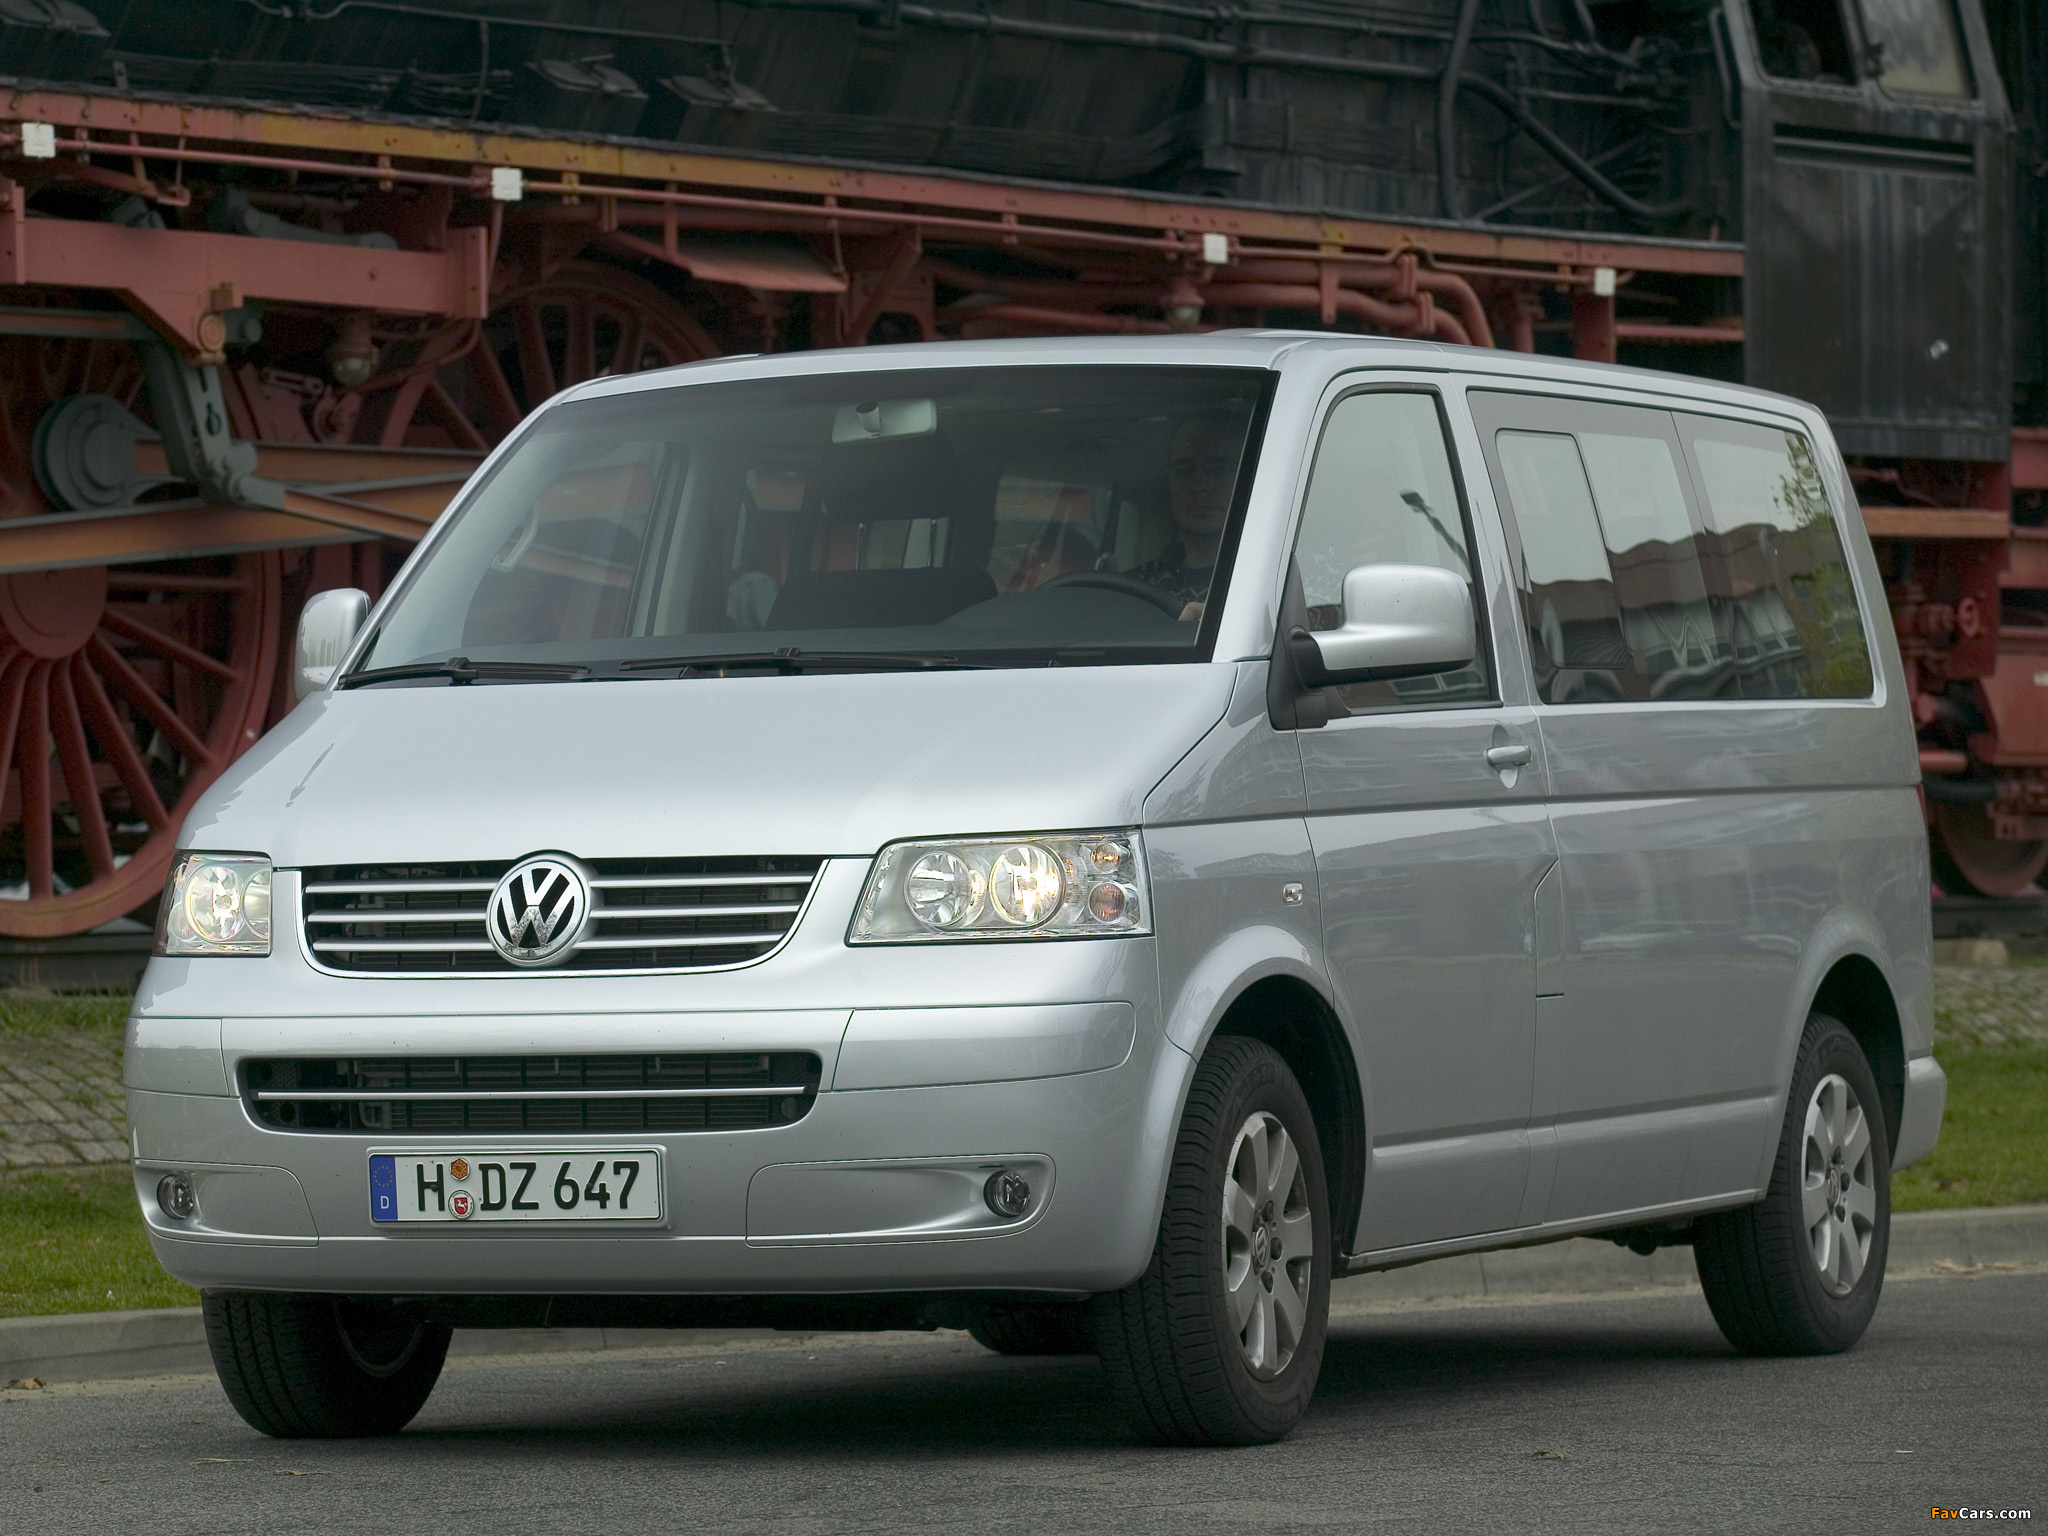 T 5с. Фольксваген Каравелла т5. VW Transporter t5 Caravelle. Фольксваген транспортёр т5 2003. Фольксваген Транспортер т5 2004.